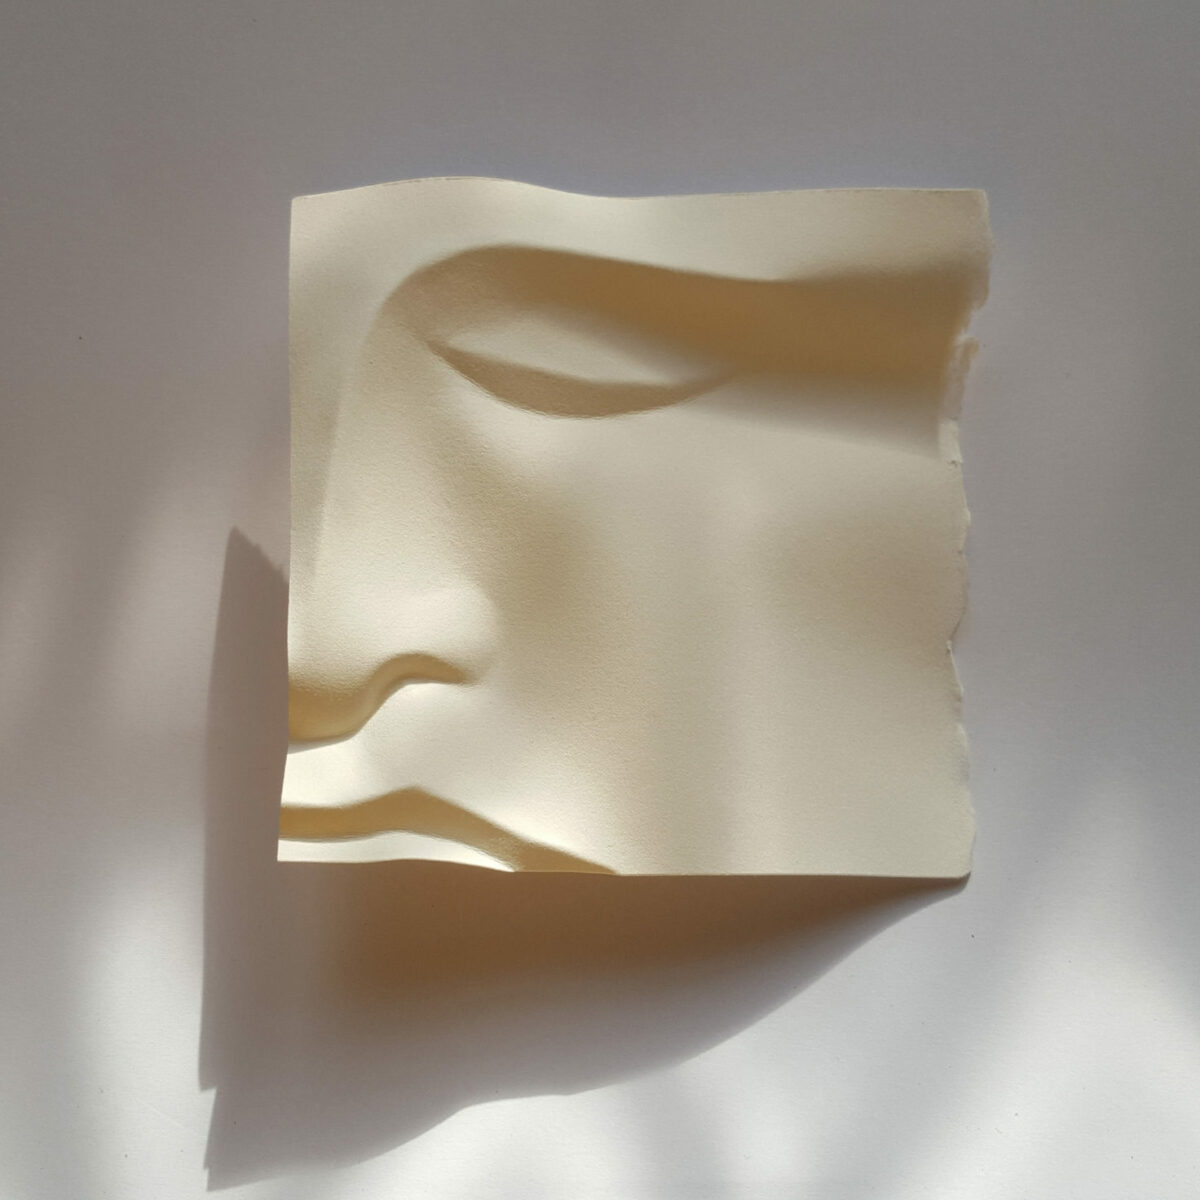 Fascinating Facial Sculptures Made From Folded Paper Sheets By Polly Verity (7)